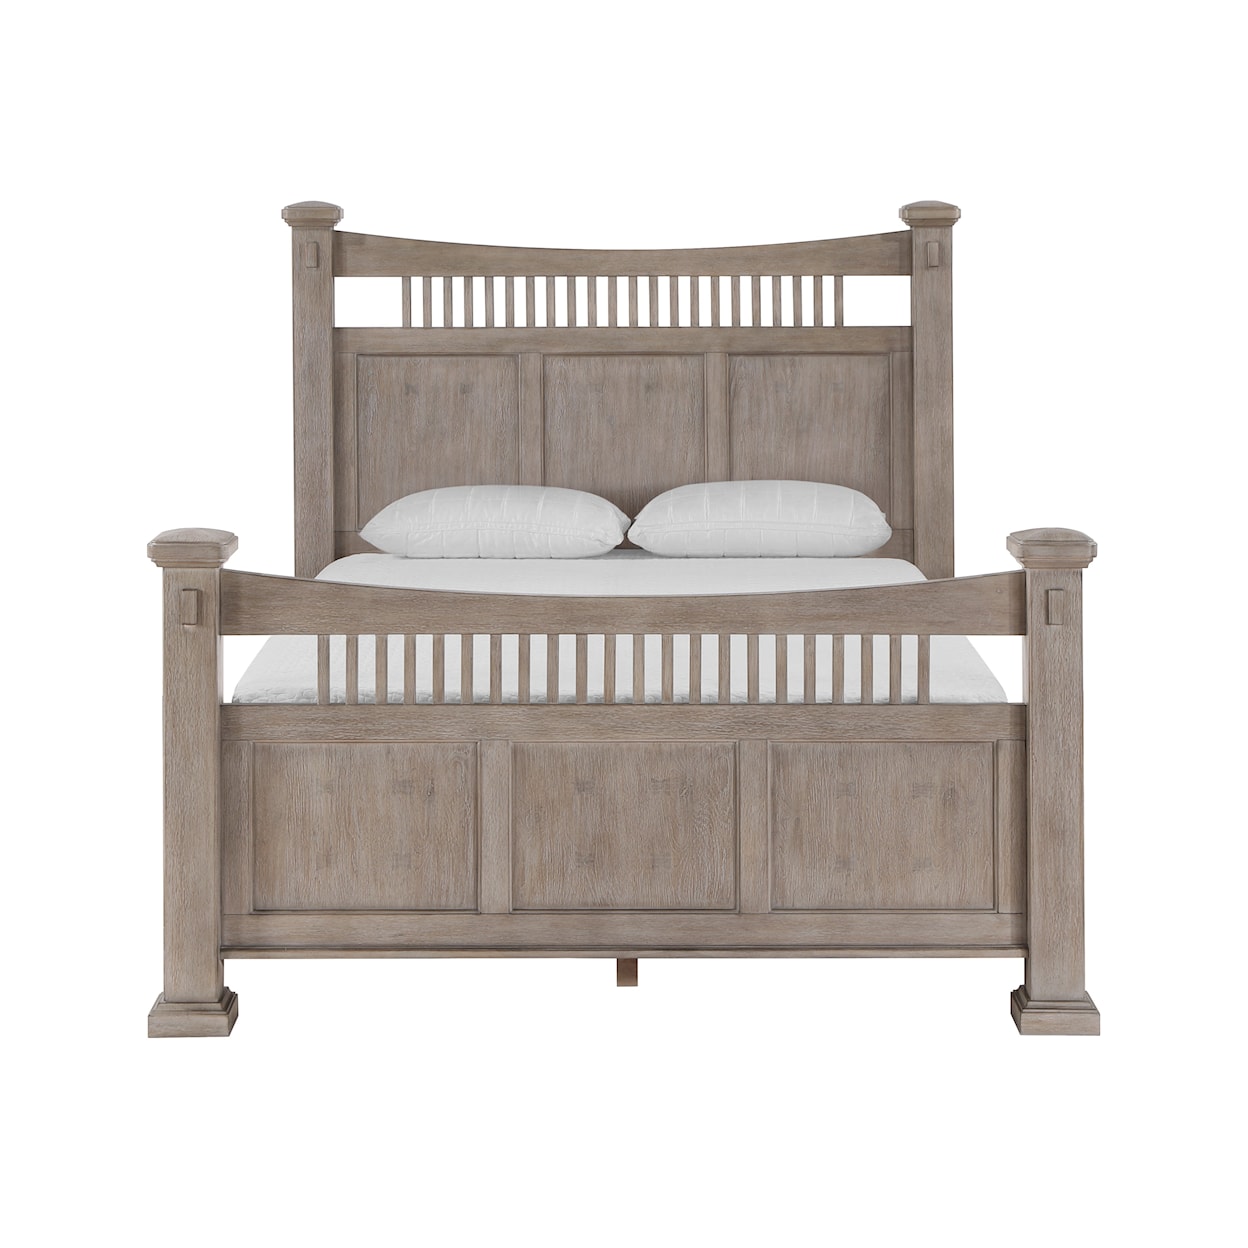 Holland House Oatfield Queen Bed